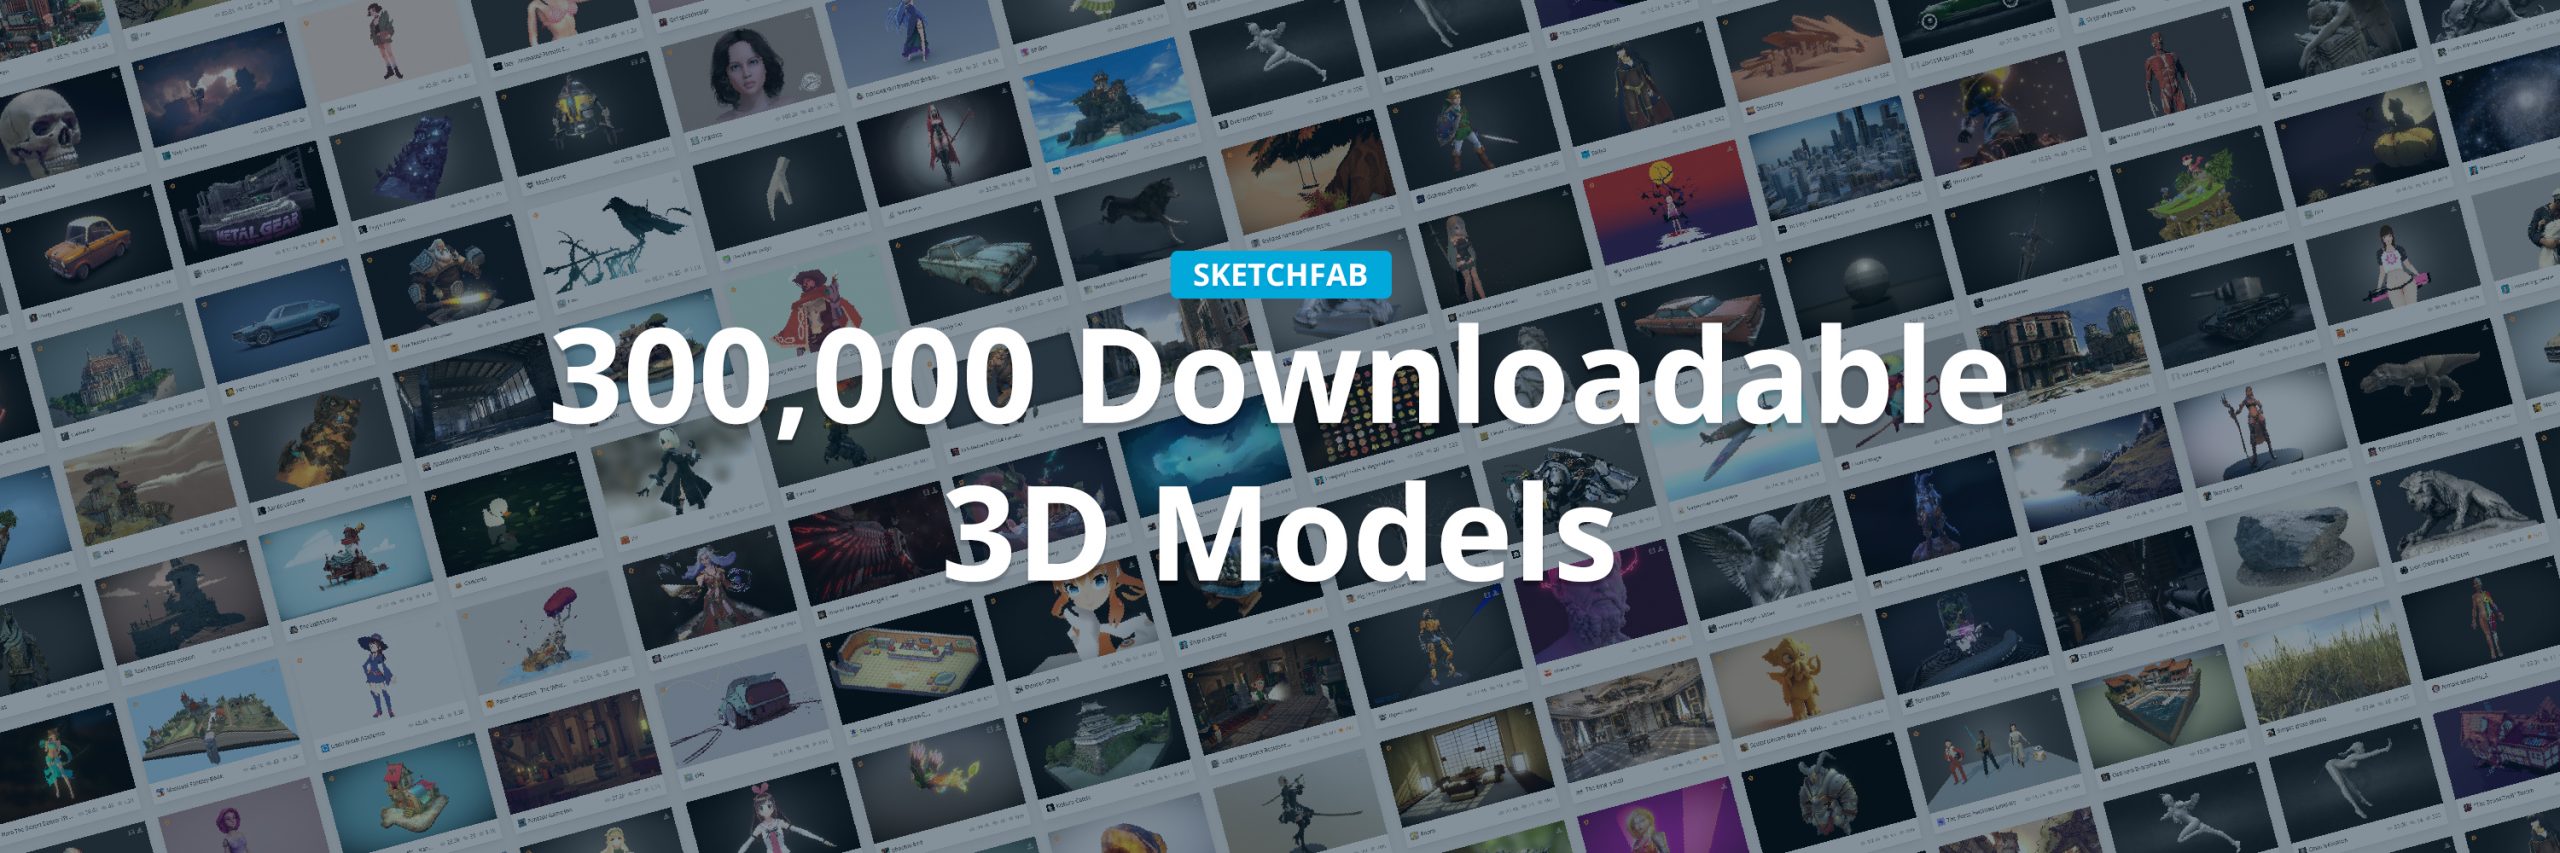 Sketchfab Community Blog 300 000 Free 3d Models Available On